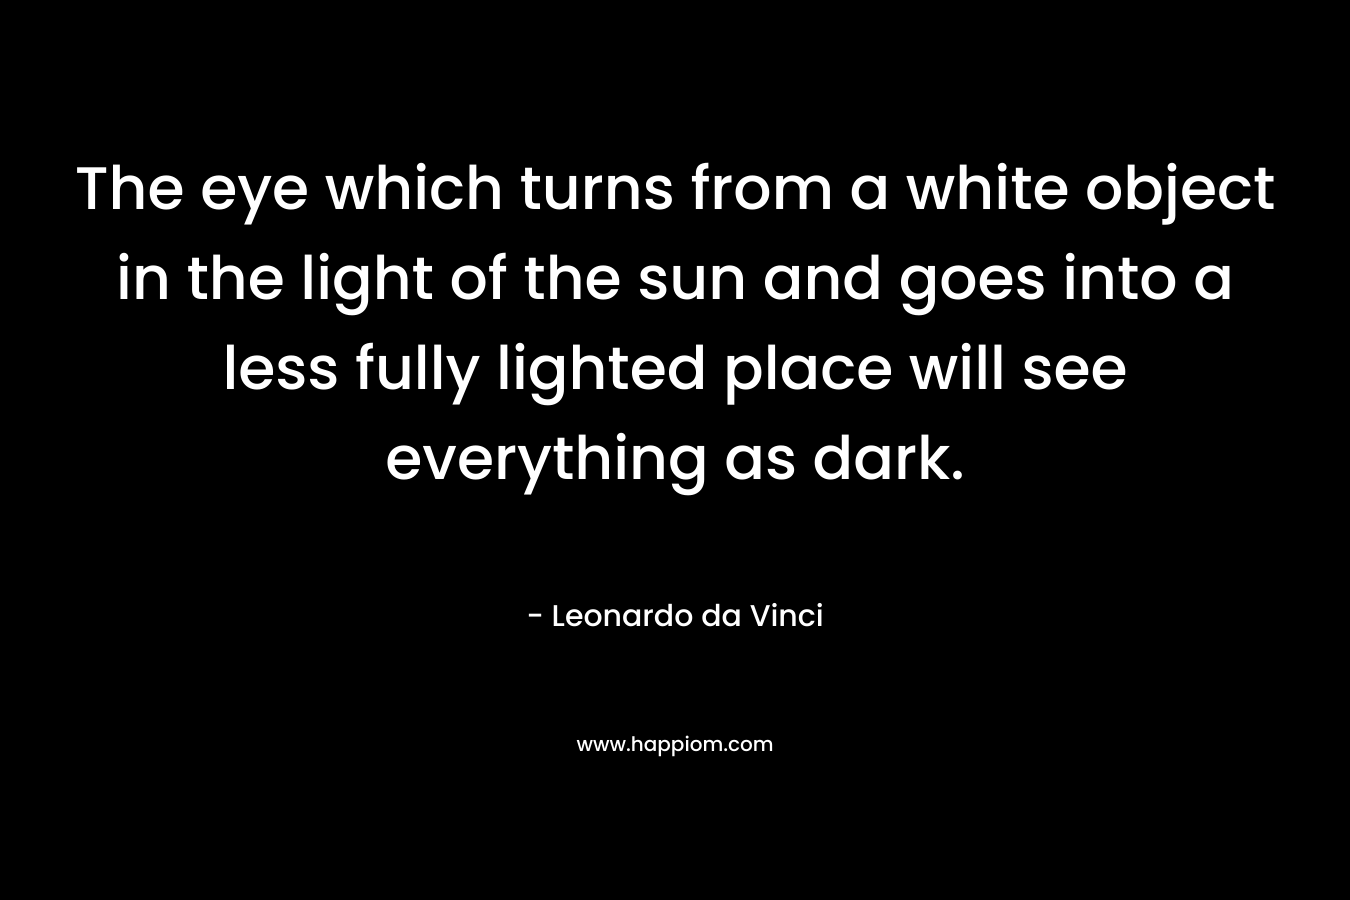 The eye which turns from a white object in the light of the sun and goes into a less fully lighted place will see everything as dark. – Leonardo da Vinci